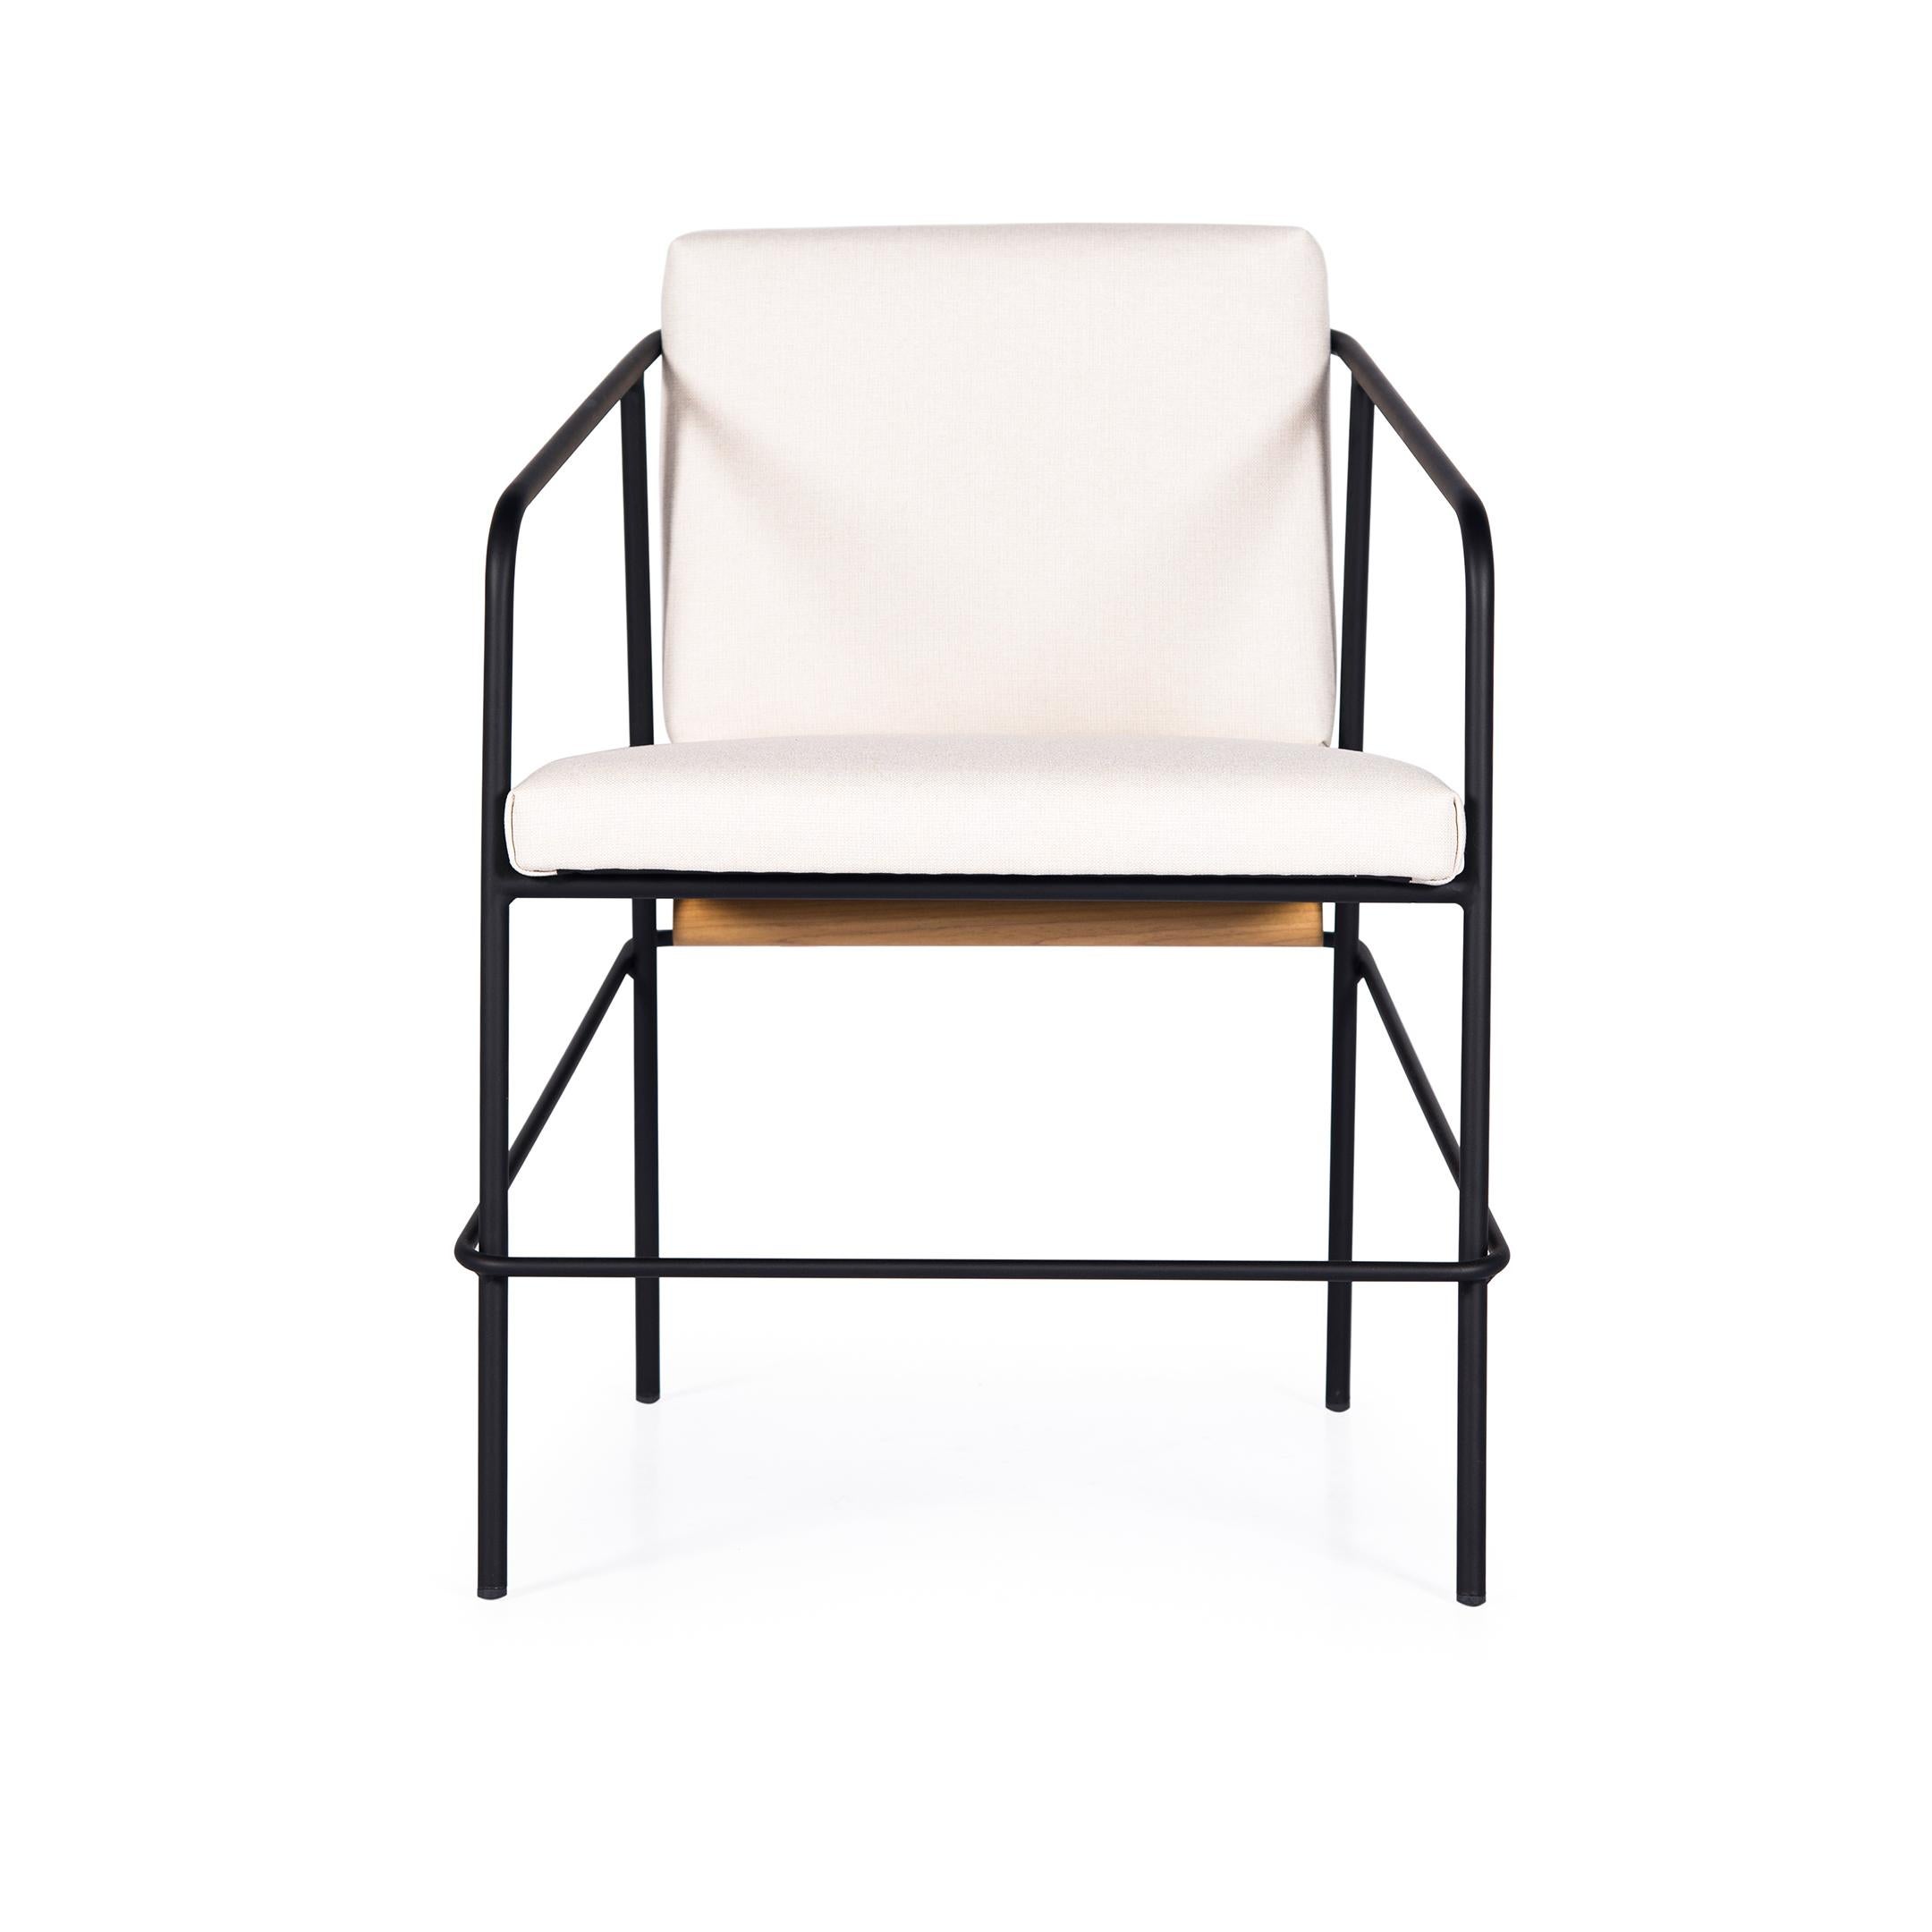 The structure of the OLAV chair is made of carbon steel in the painted with black ink.
The upholstery fabric that can be customized (request information).
It has leather backrest in Afro finish and a natural wooden wood cylinder that translates the